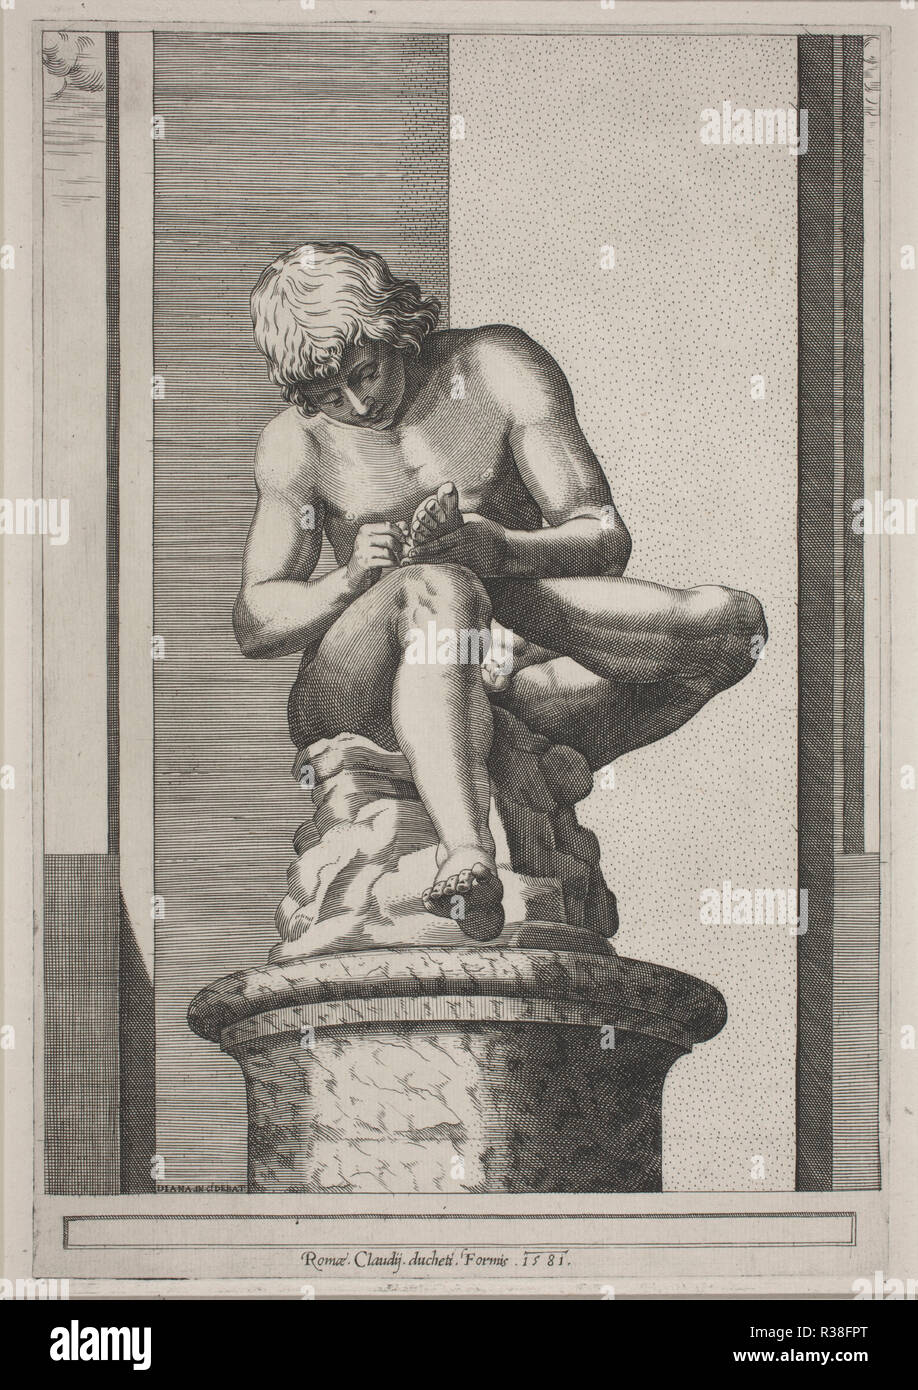 The Spinario. Dated: 1581. Dimensions: plate: 30.6 x 20.8 cm (12 1/16 x 8 3/16 in.)  sheet: 54 x 42.9 cm (21 1/4 x 16 7/8 in.). Medium: engraving on laid paper. Museum: National Gallery of Art, Washington DC. Author: Diana Scultori. Stock Photo